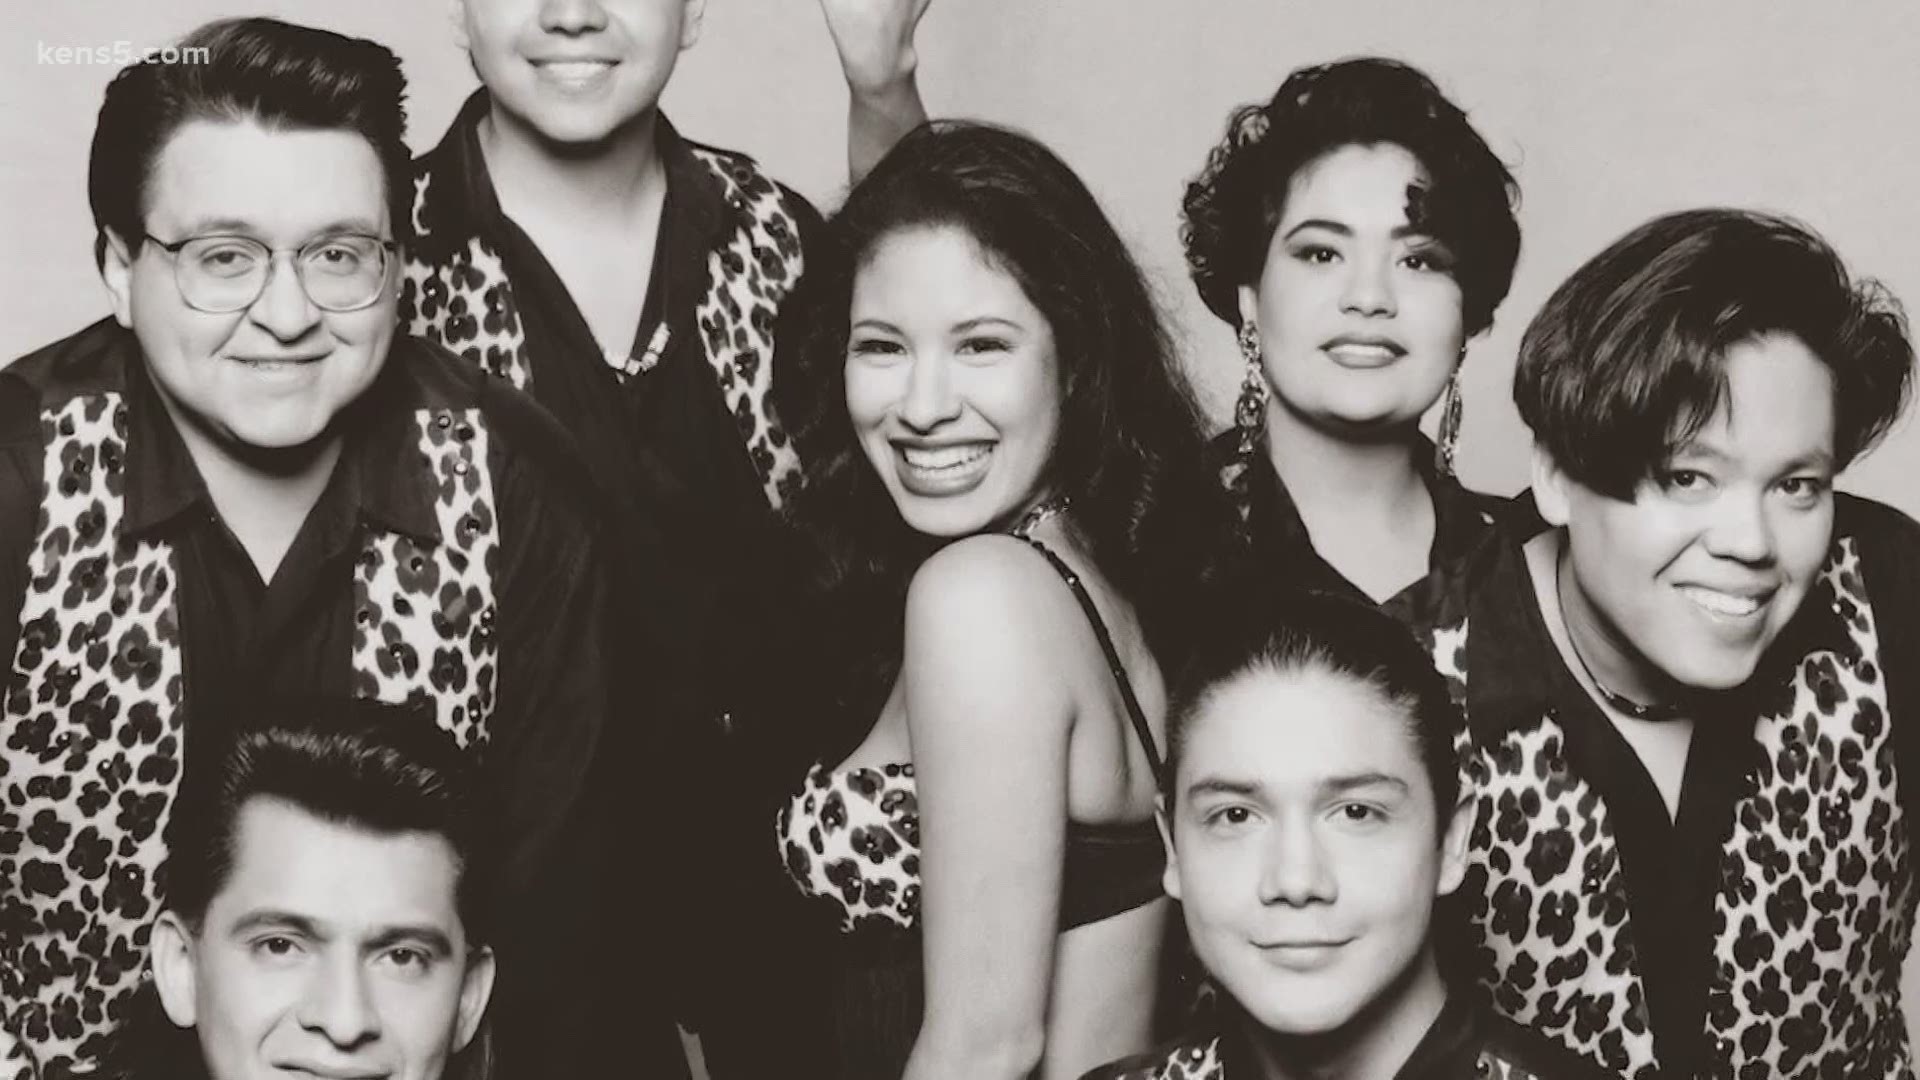 Selena, the Queen of Tejano, would have turned 50 today. A San Antonio photographer is sharing his memories on the national stage.